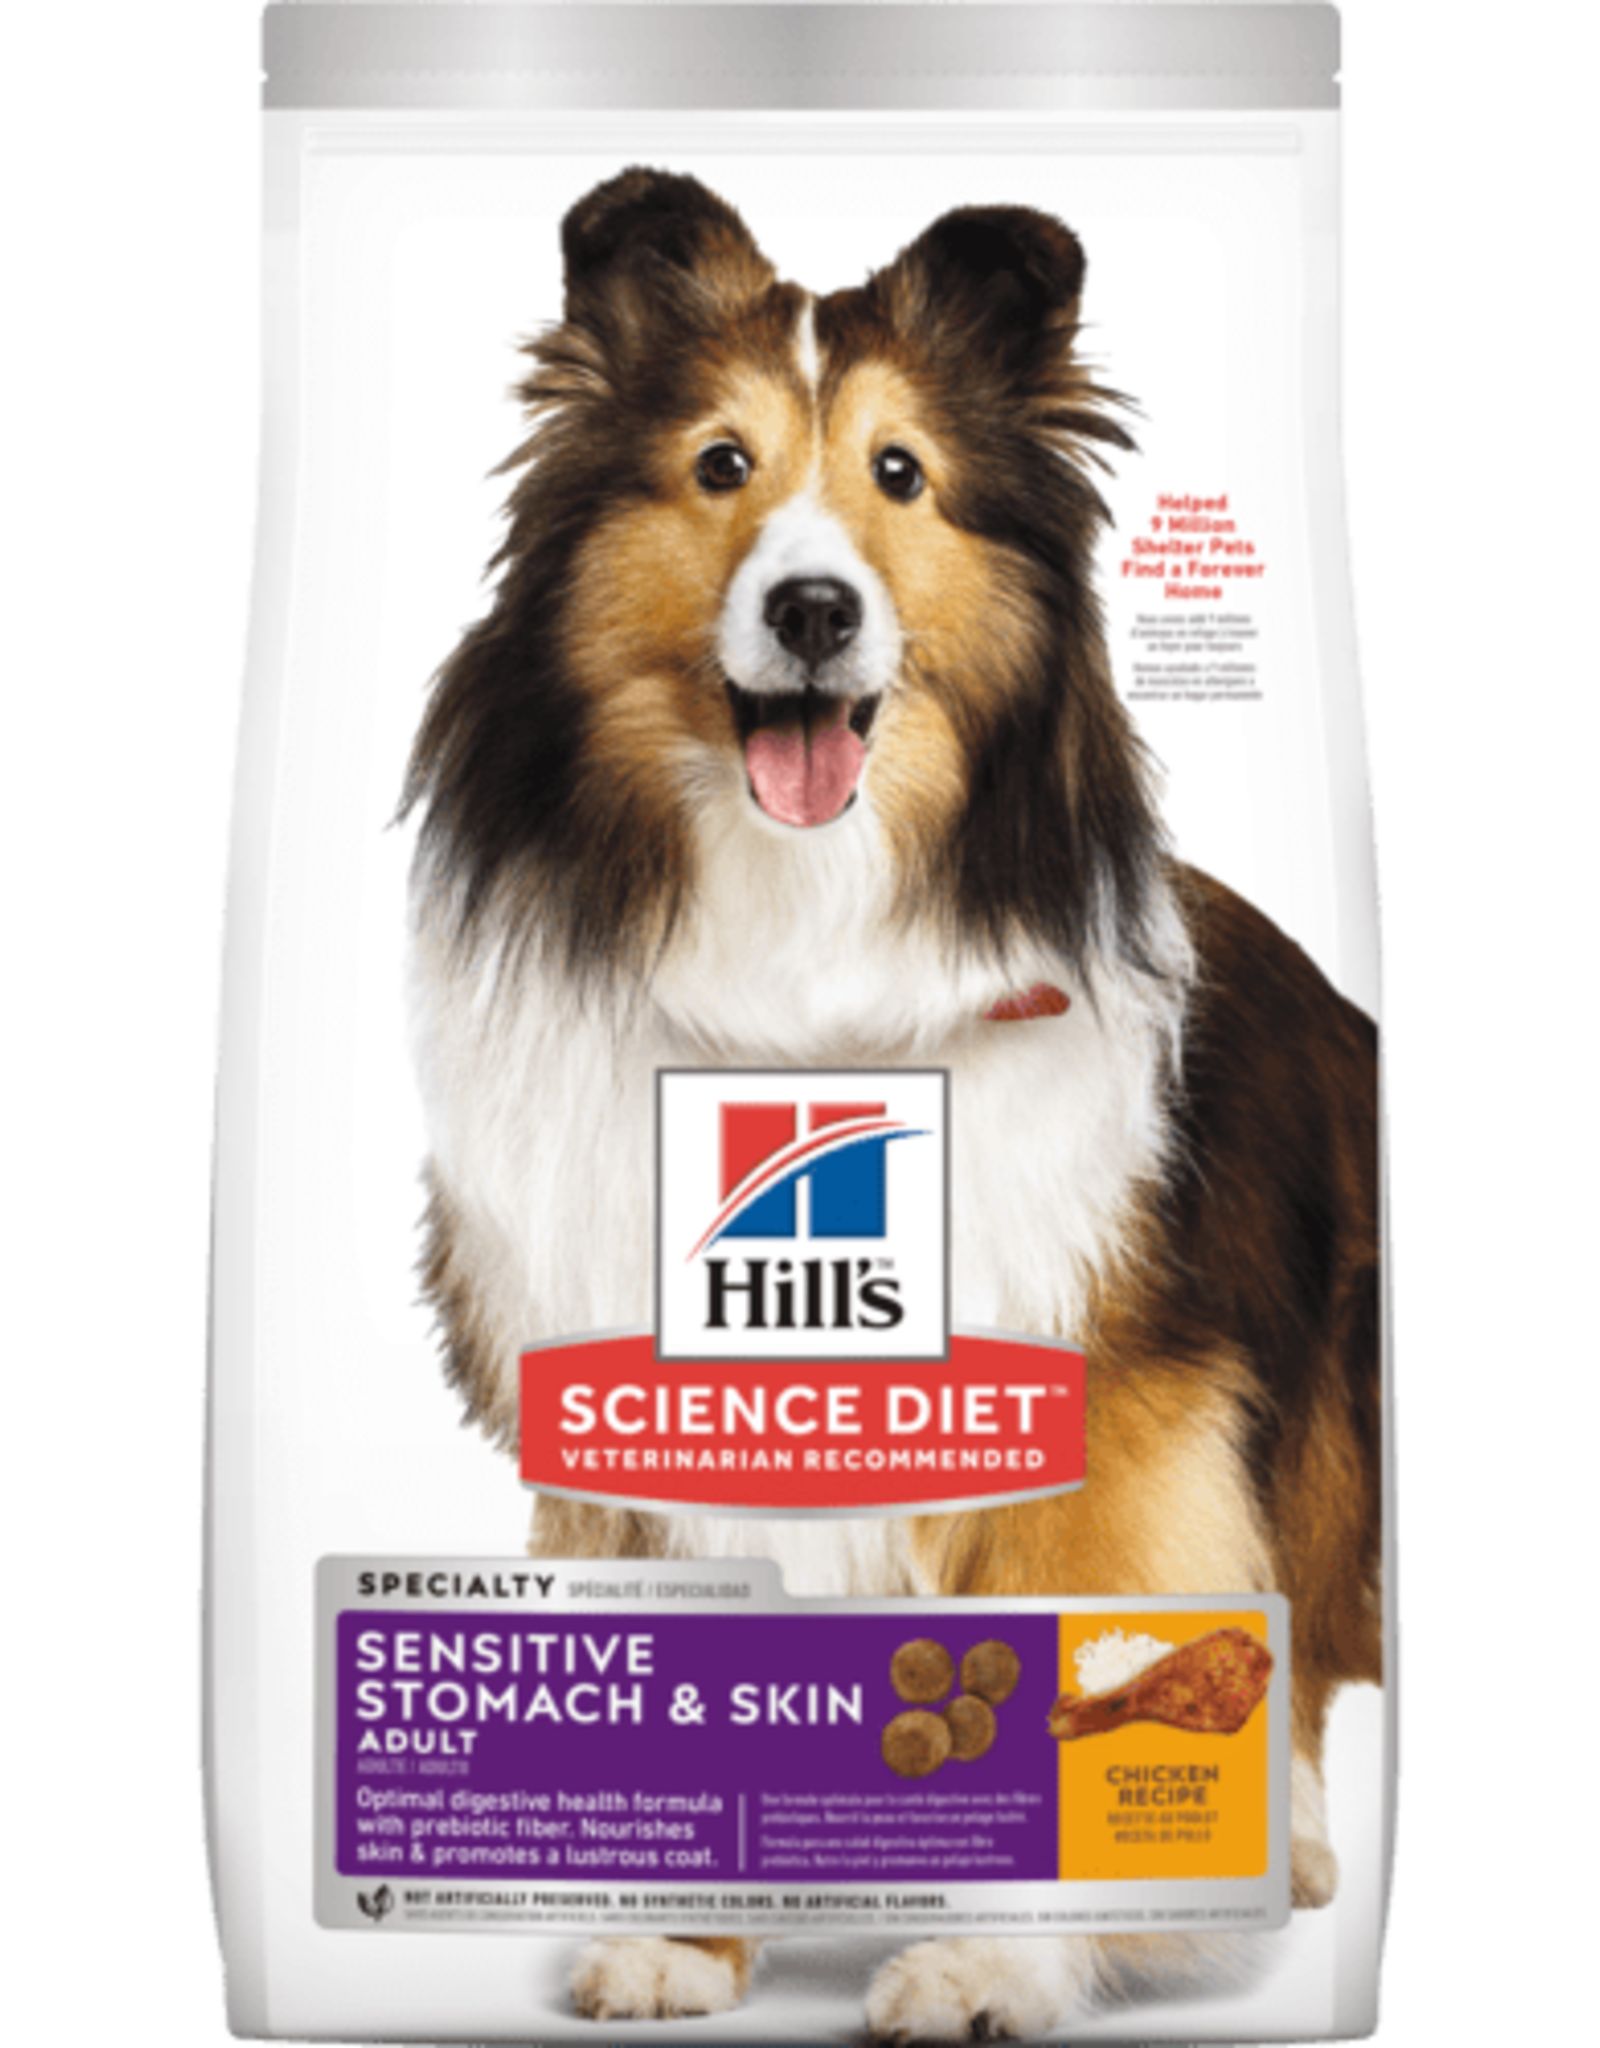 SCIENCE DIET HILL'S SCIENCE DIET CANINE SENSITIVE STOMACH & SKIN 15.5LBS